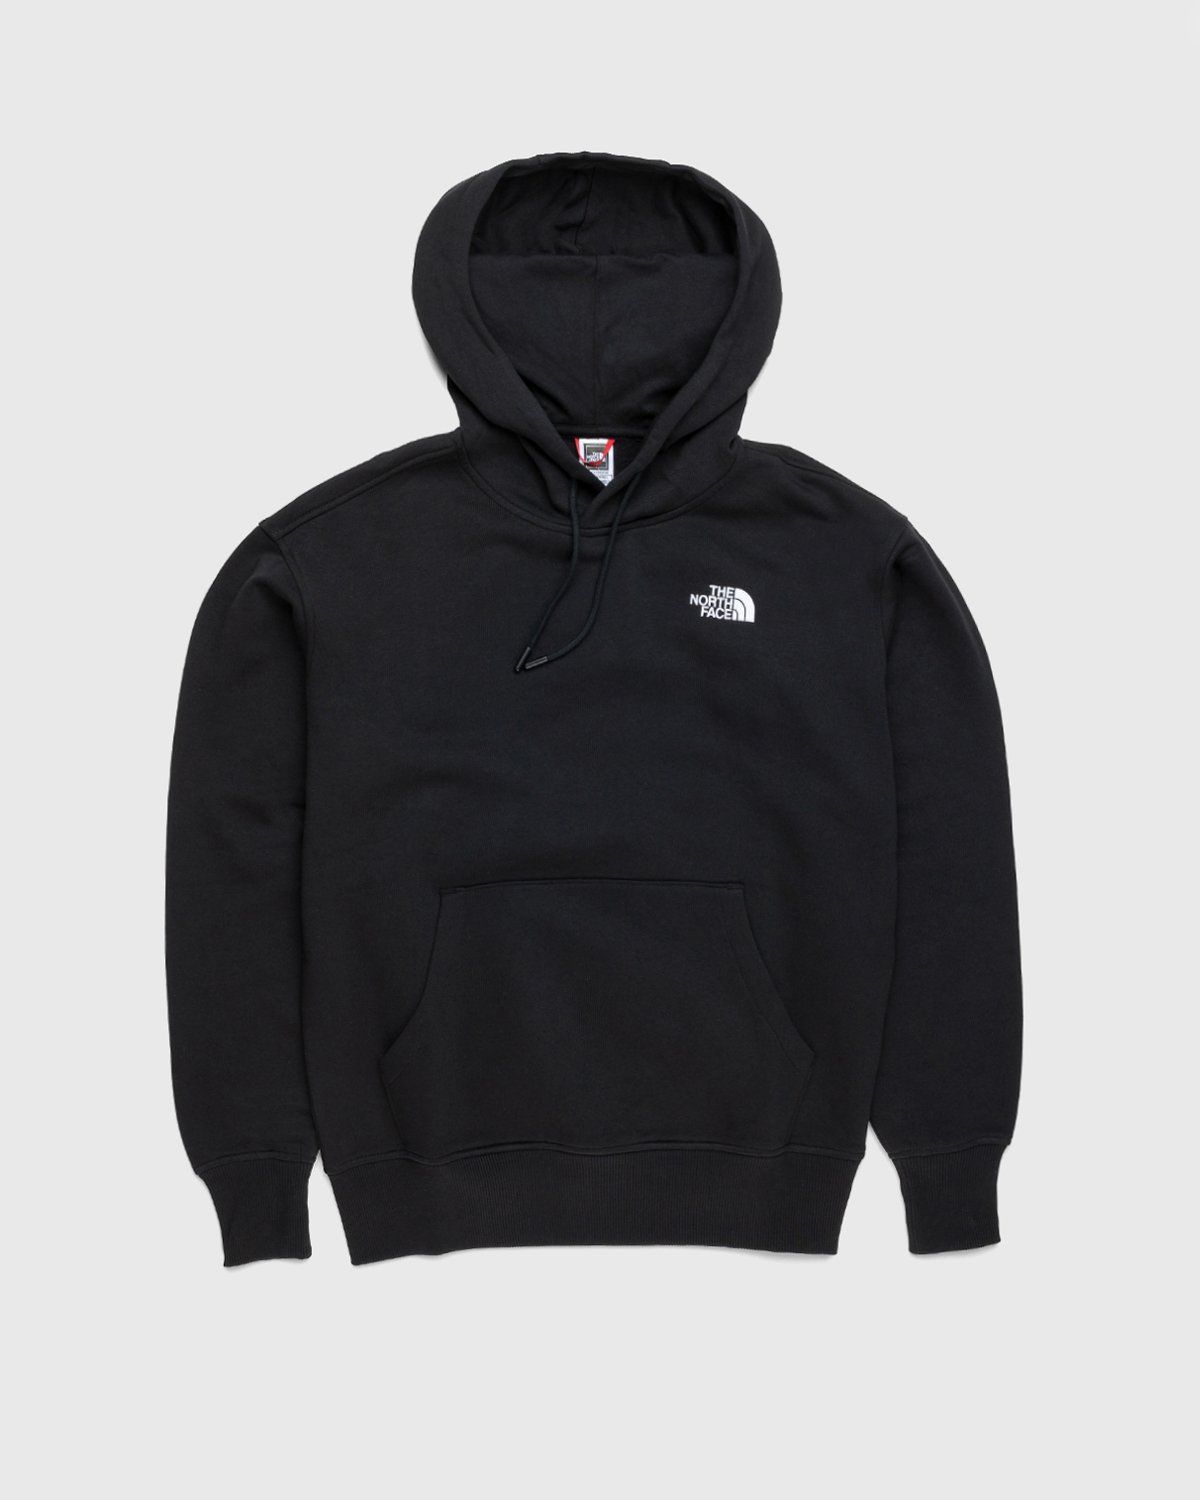 The North Face – Oversized Essential Hoodie Black